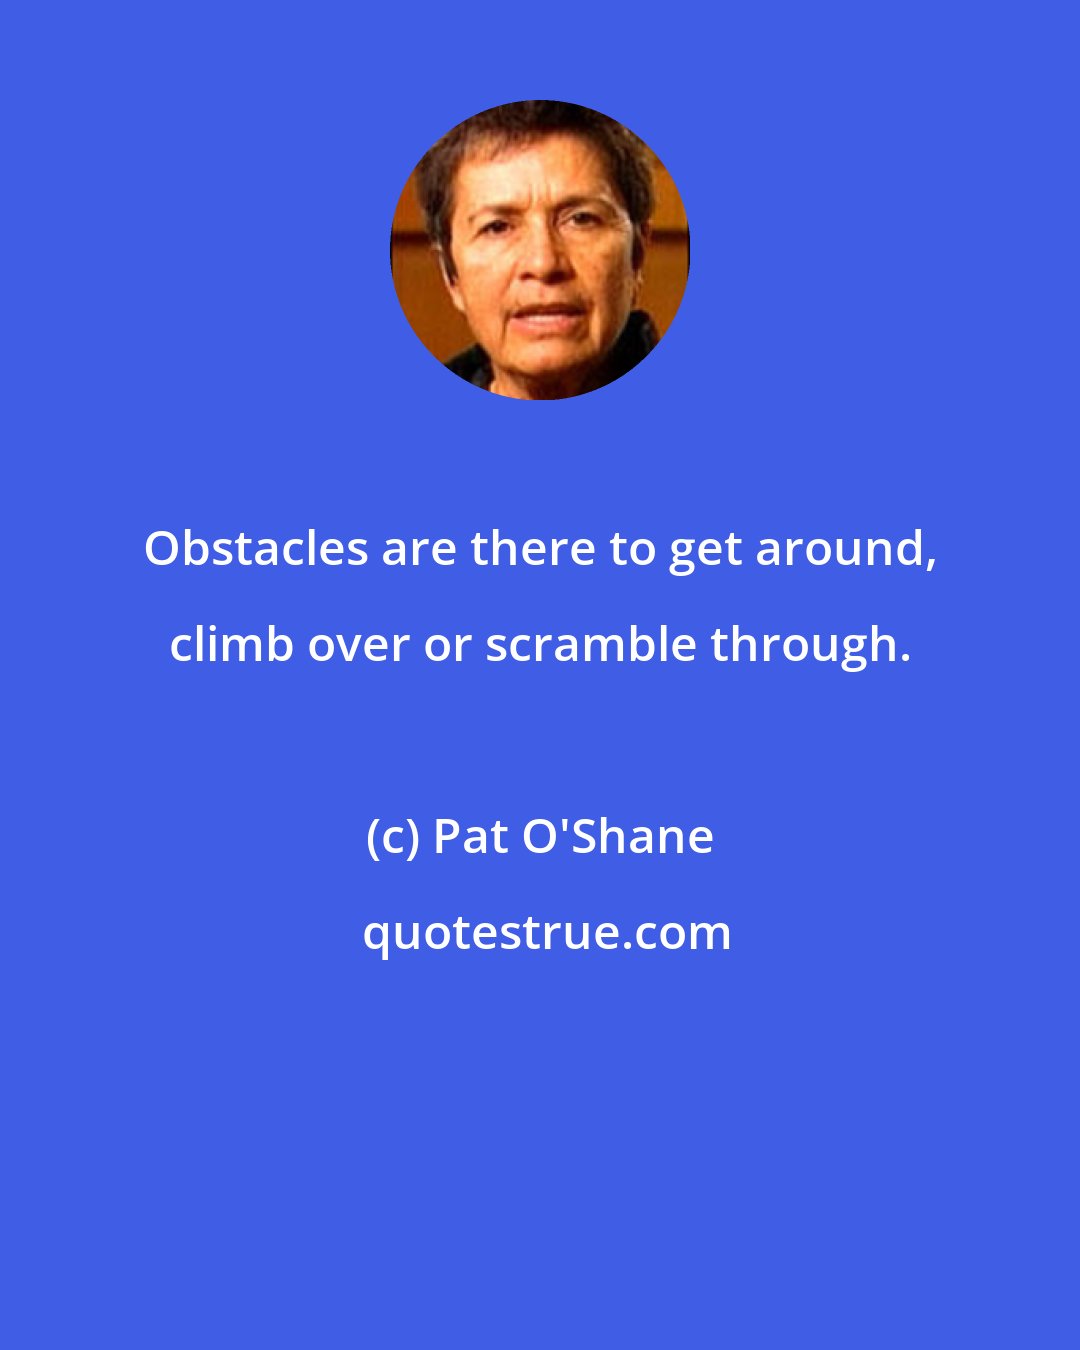 Pat O'Shane: Obstacles are there to get around, climb over or scramble through.